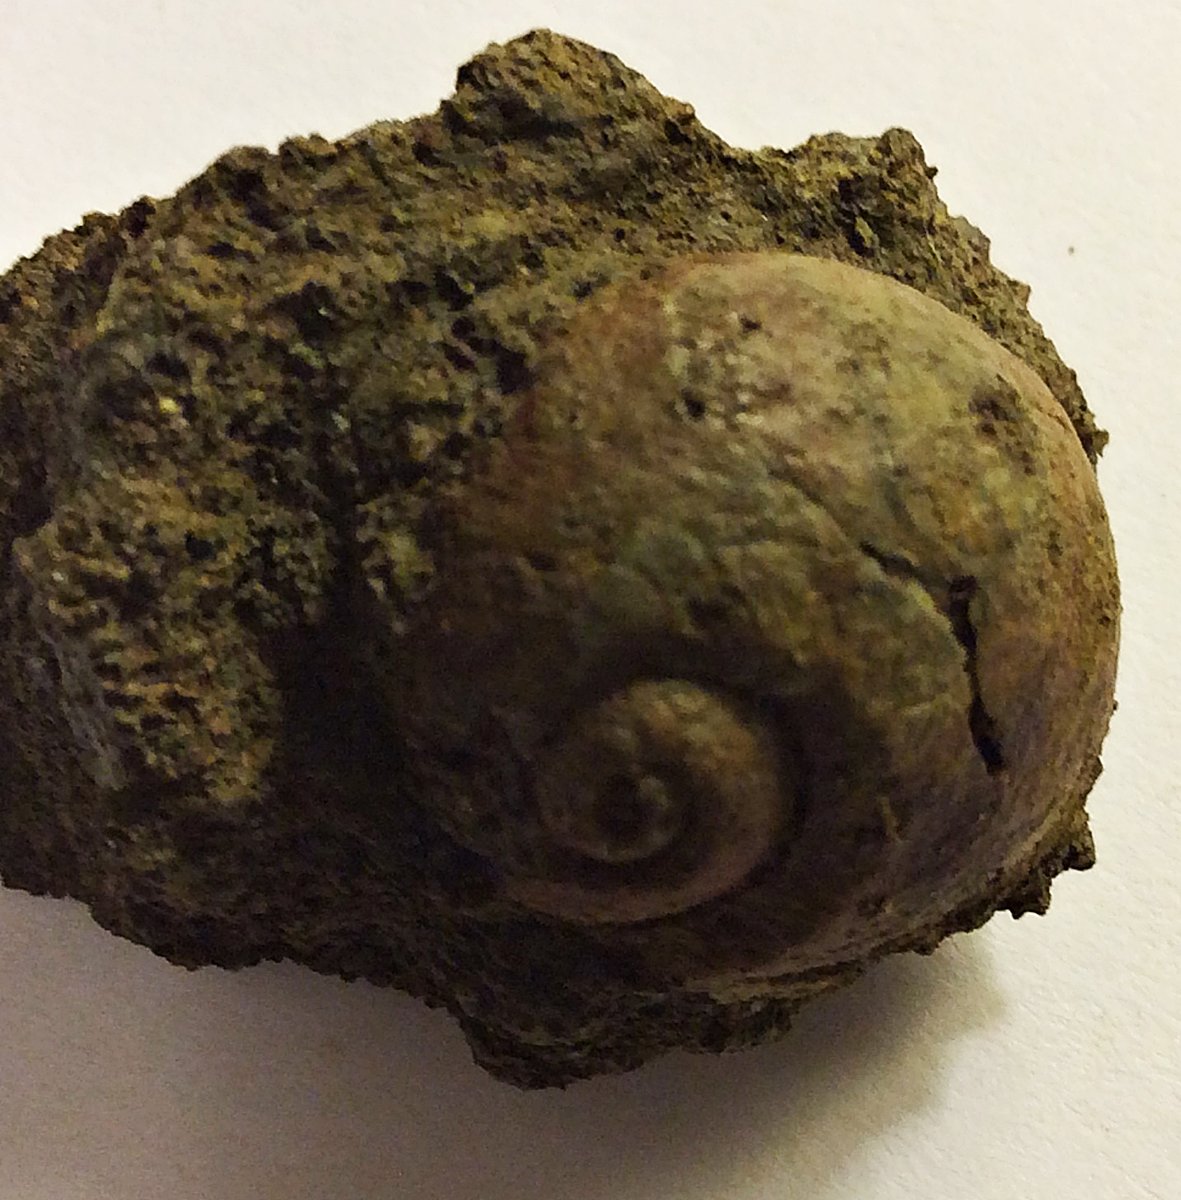 Cast of Gastropod from the Pinna Layer